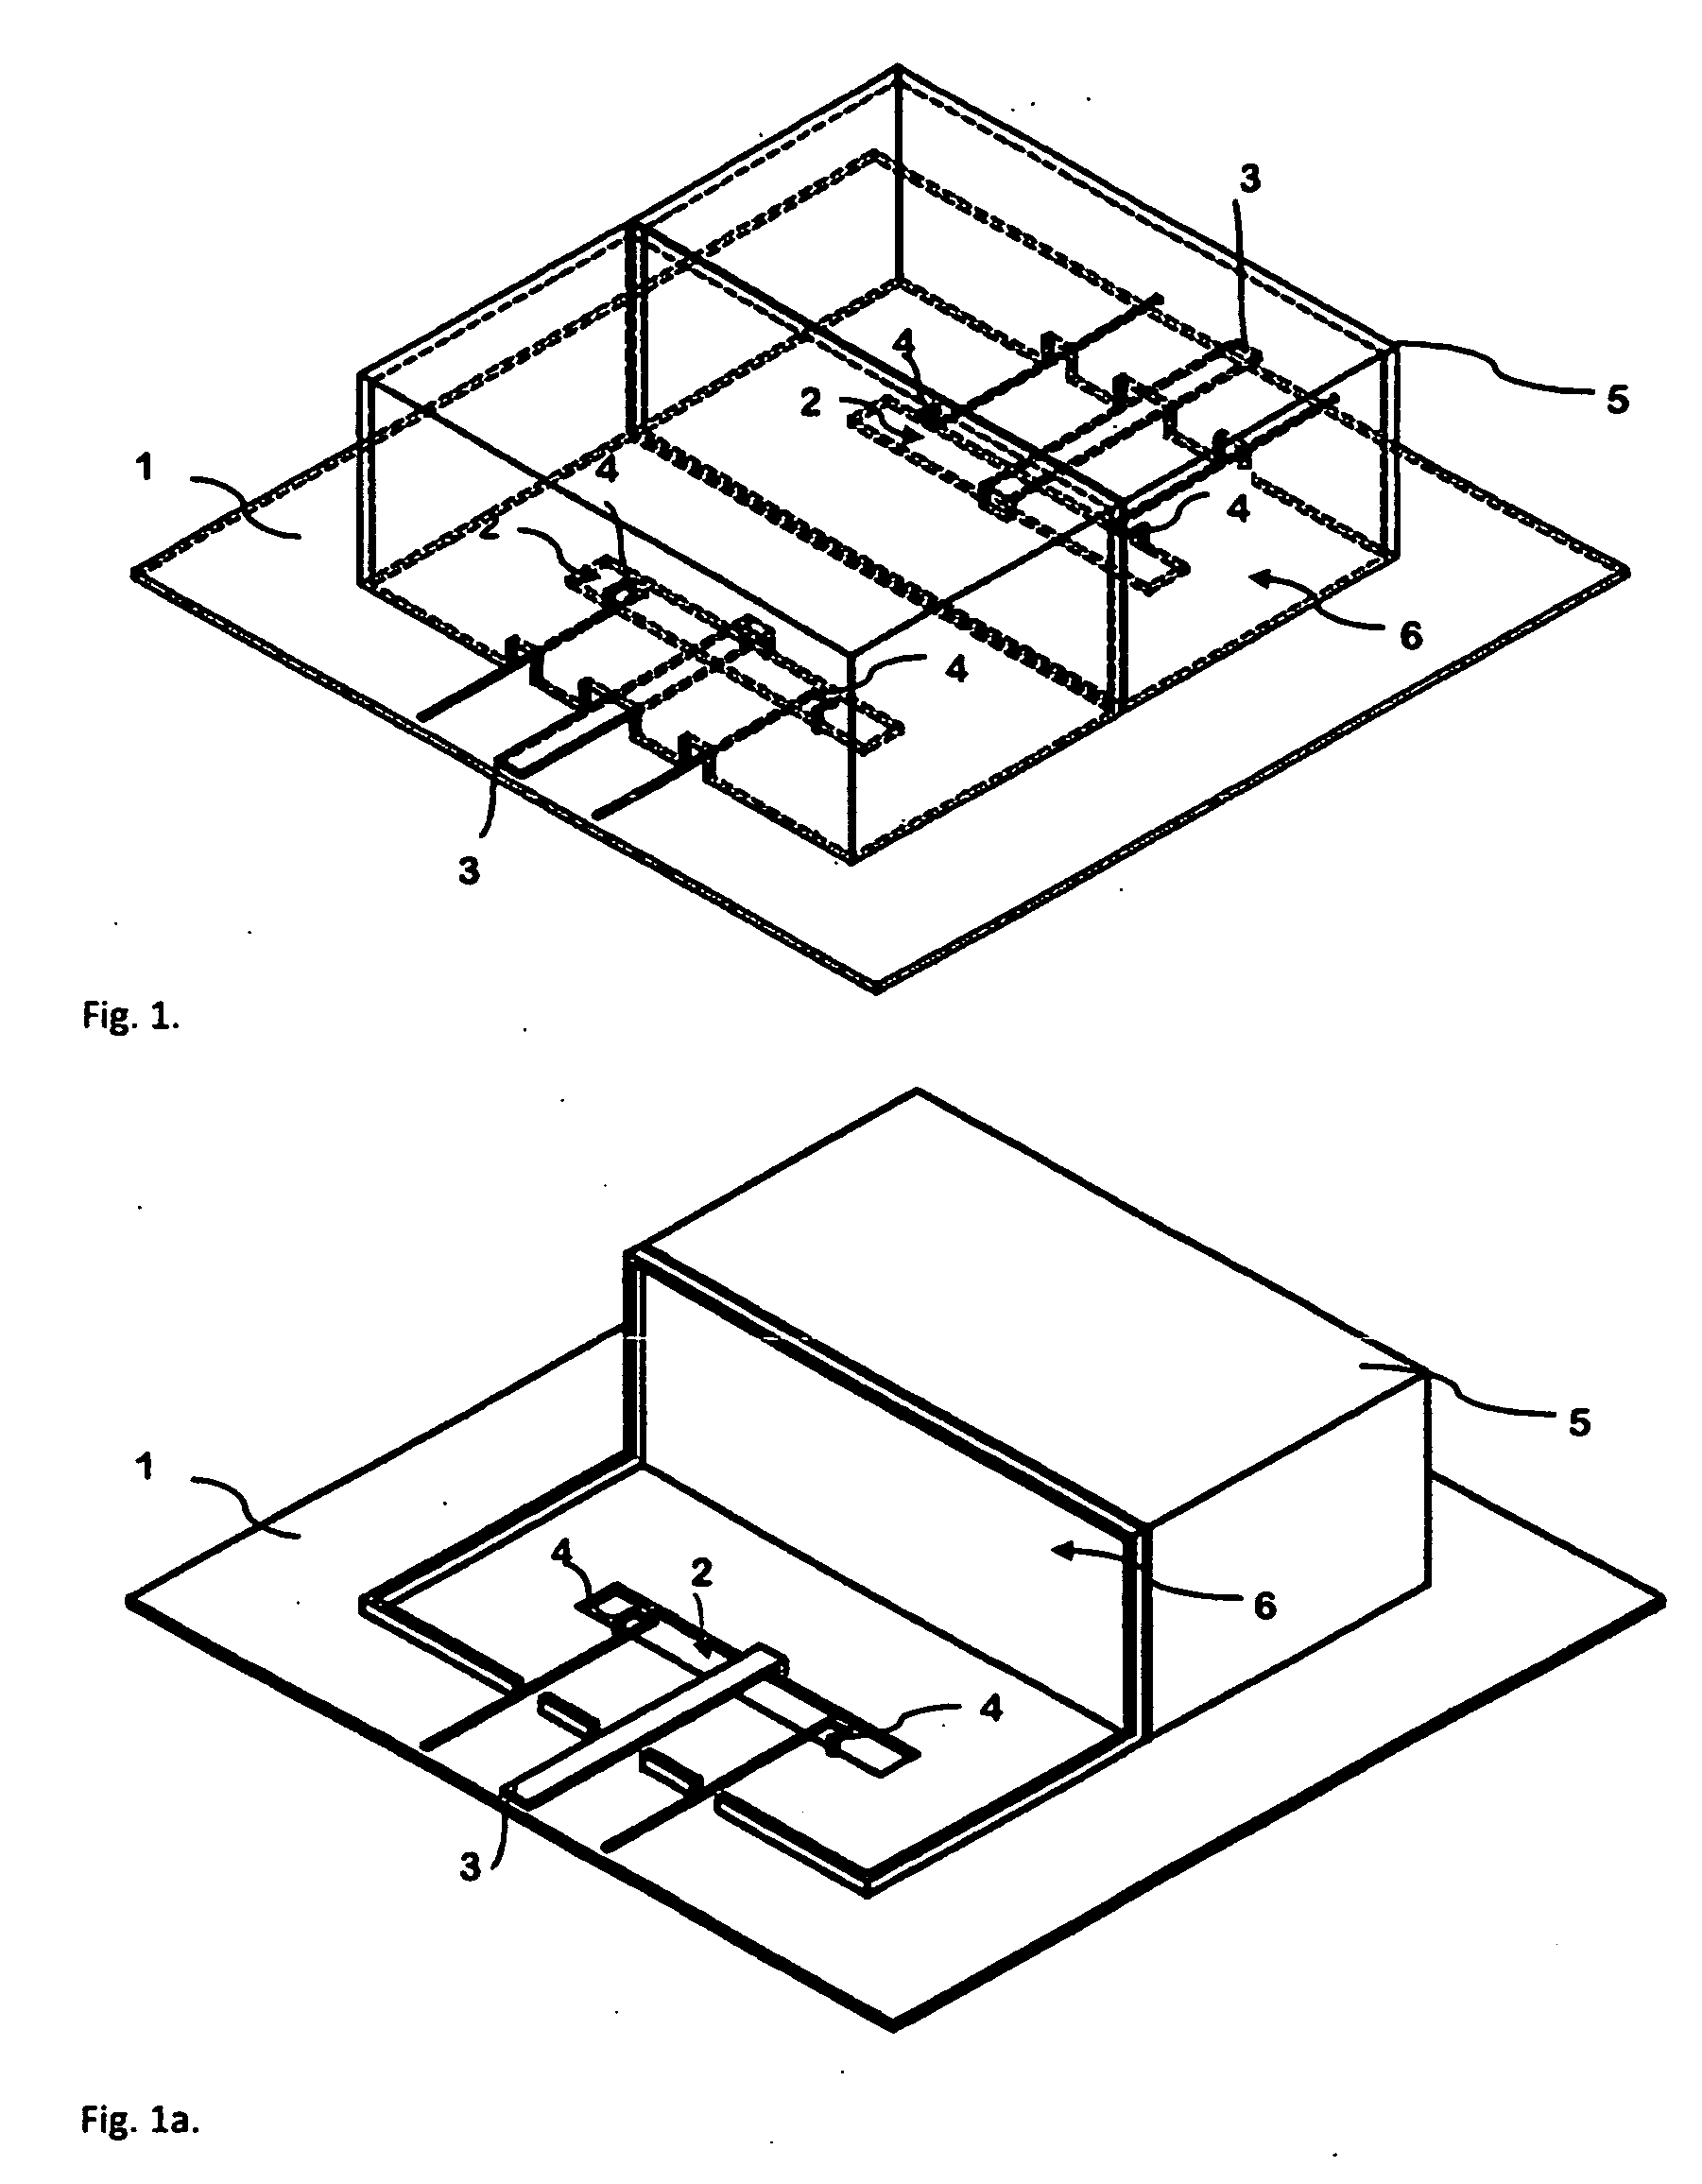 Electromagnetic Field Applicator Array with Integral Sensors for Implicit Correction of Mutual Coupling and Mismatch